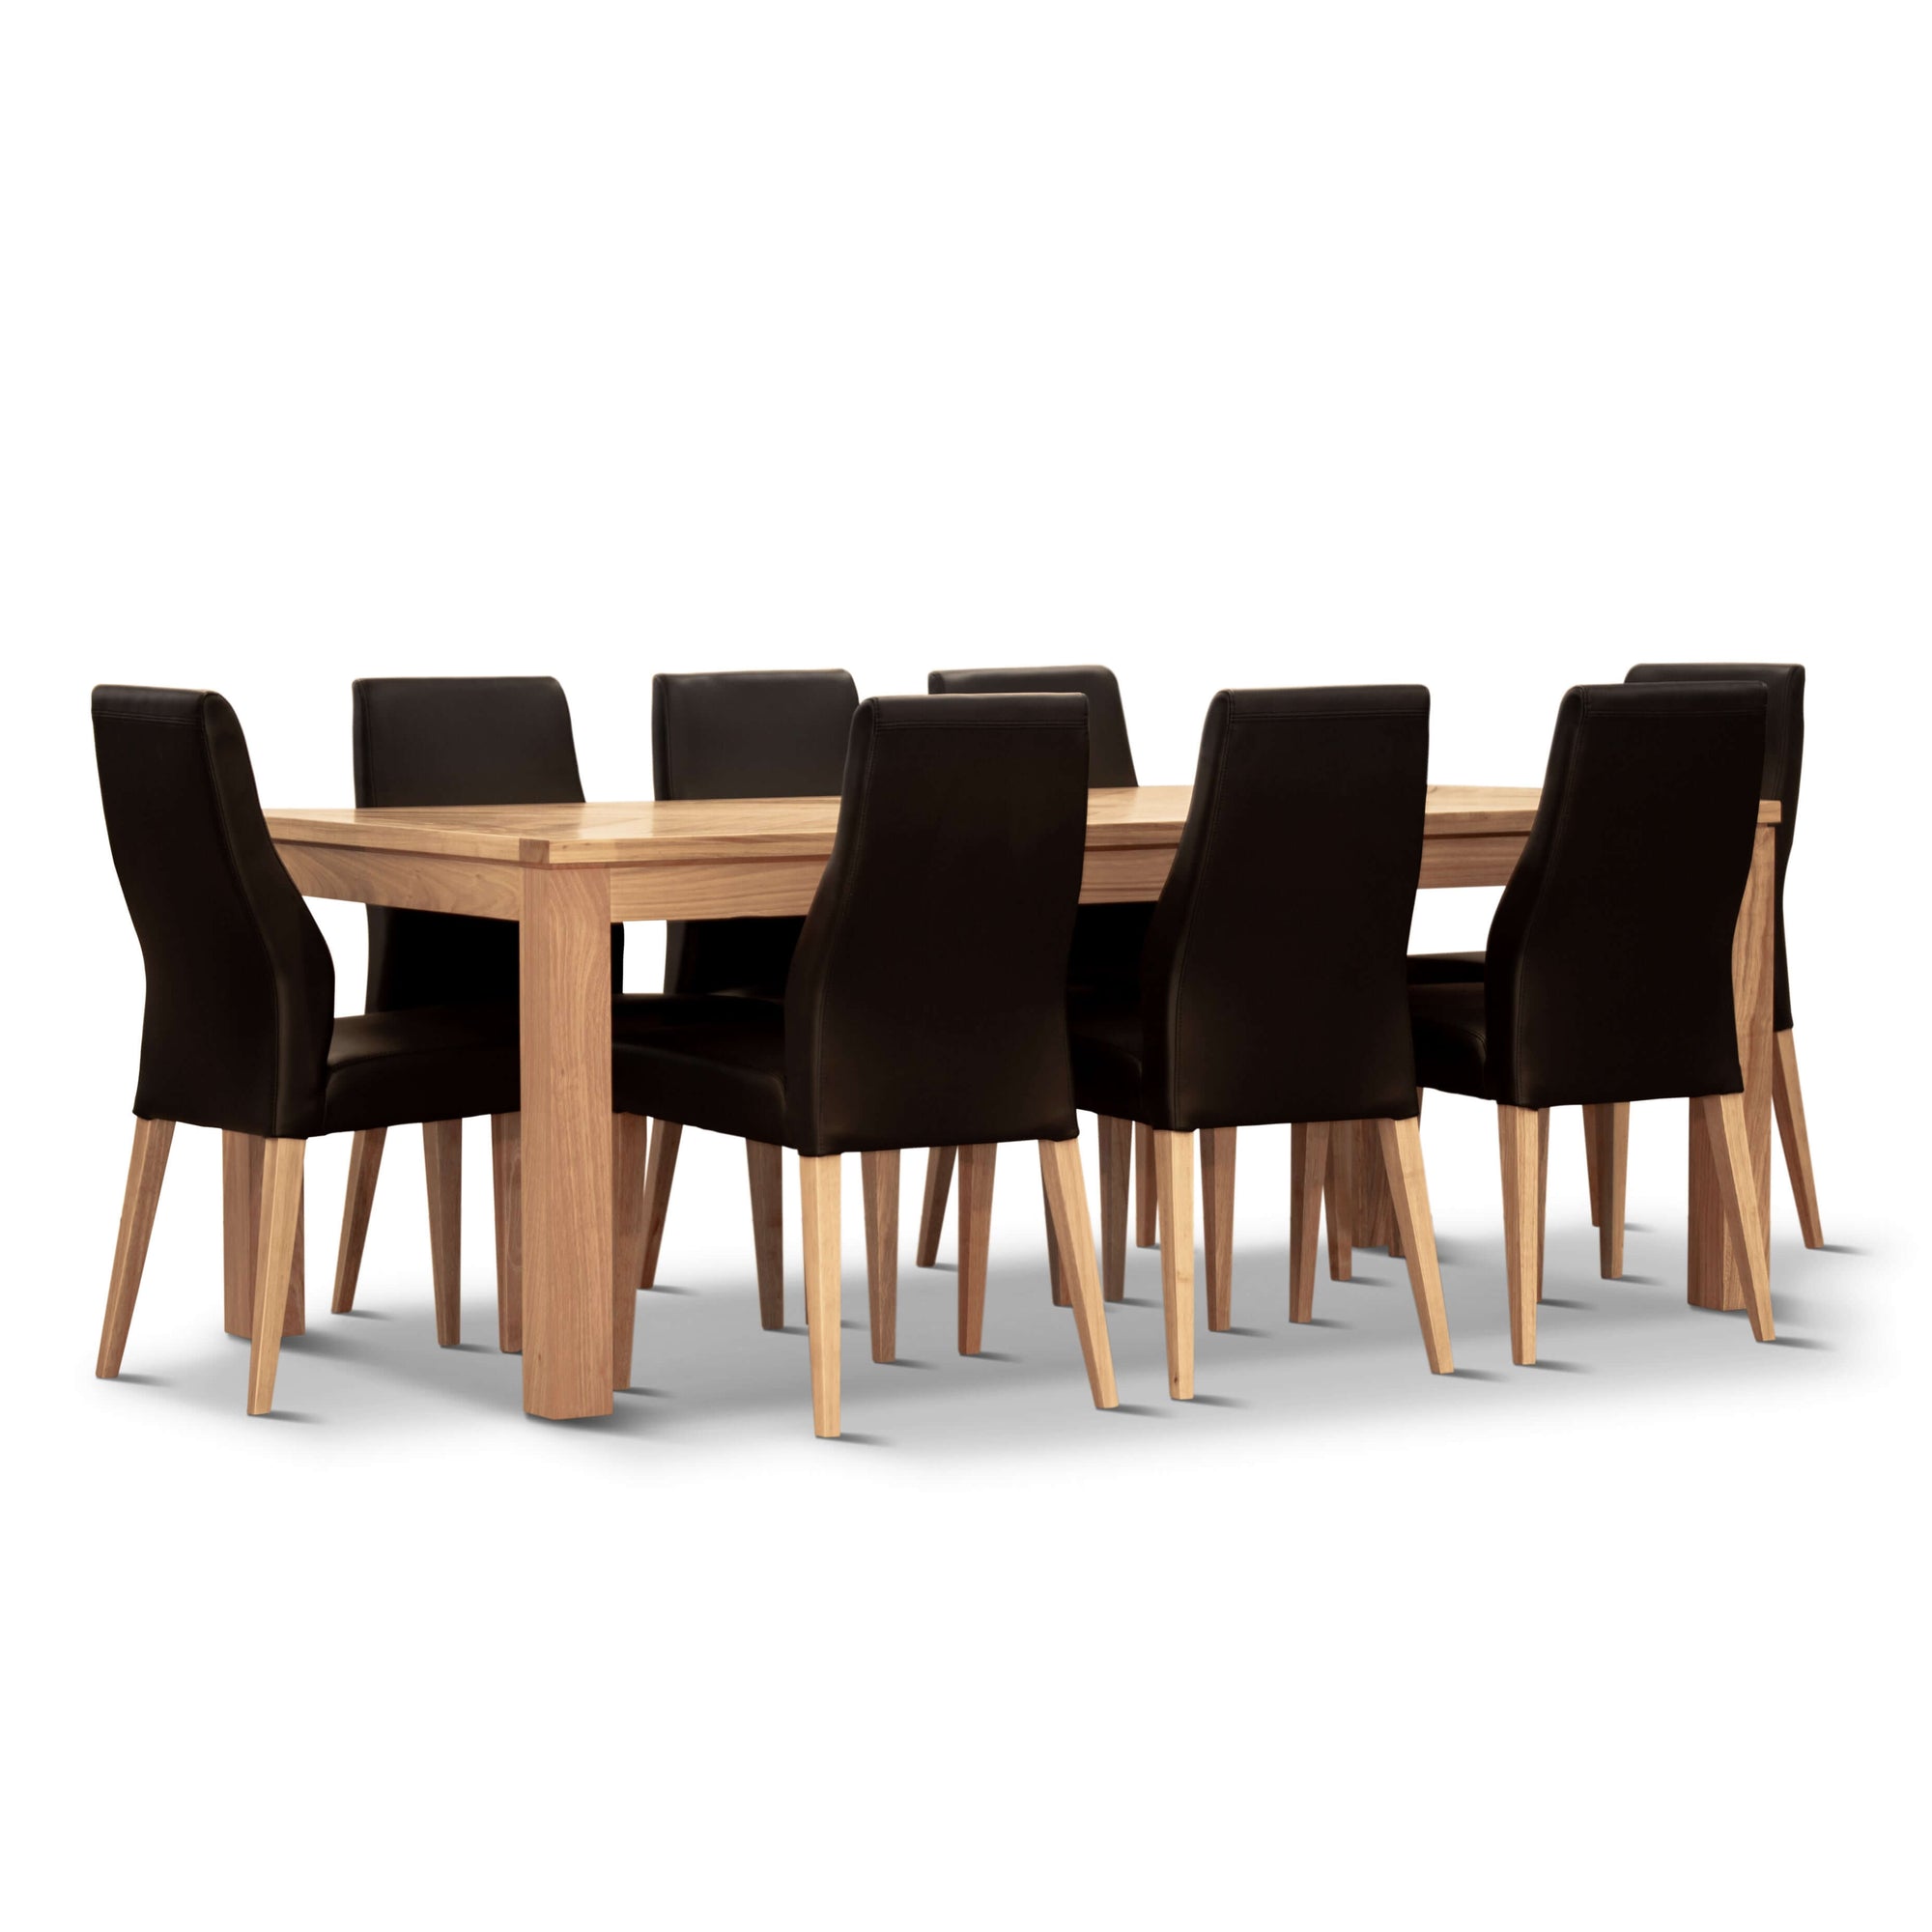 Rosemallow Dining Table 210cm 8 Seater Parquet Top Solid Messmate Timber Wood-Upinteriors